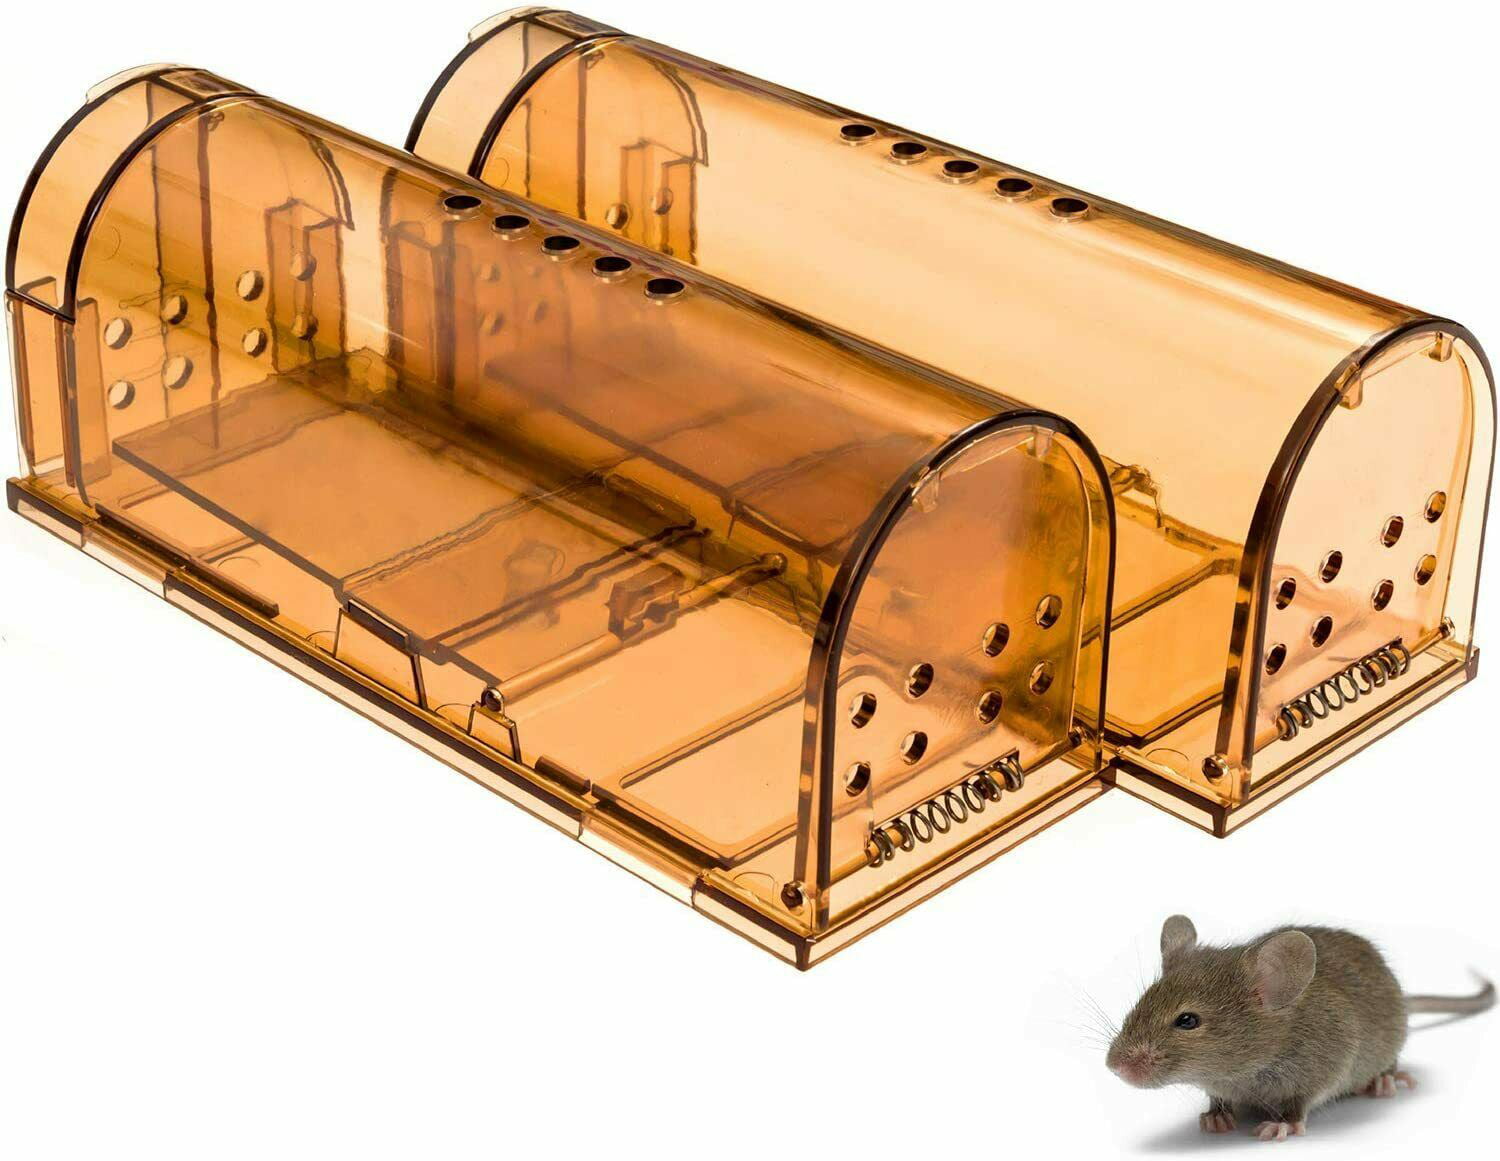 2 Pak Humane Mouse Trap Live Catch and Release No Kill Mice Piege Indoor Outdoor 